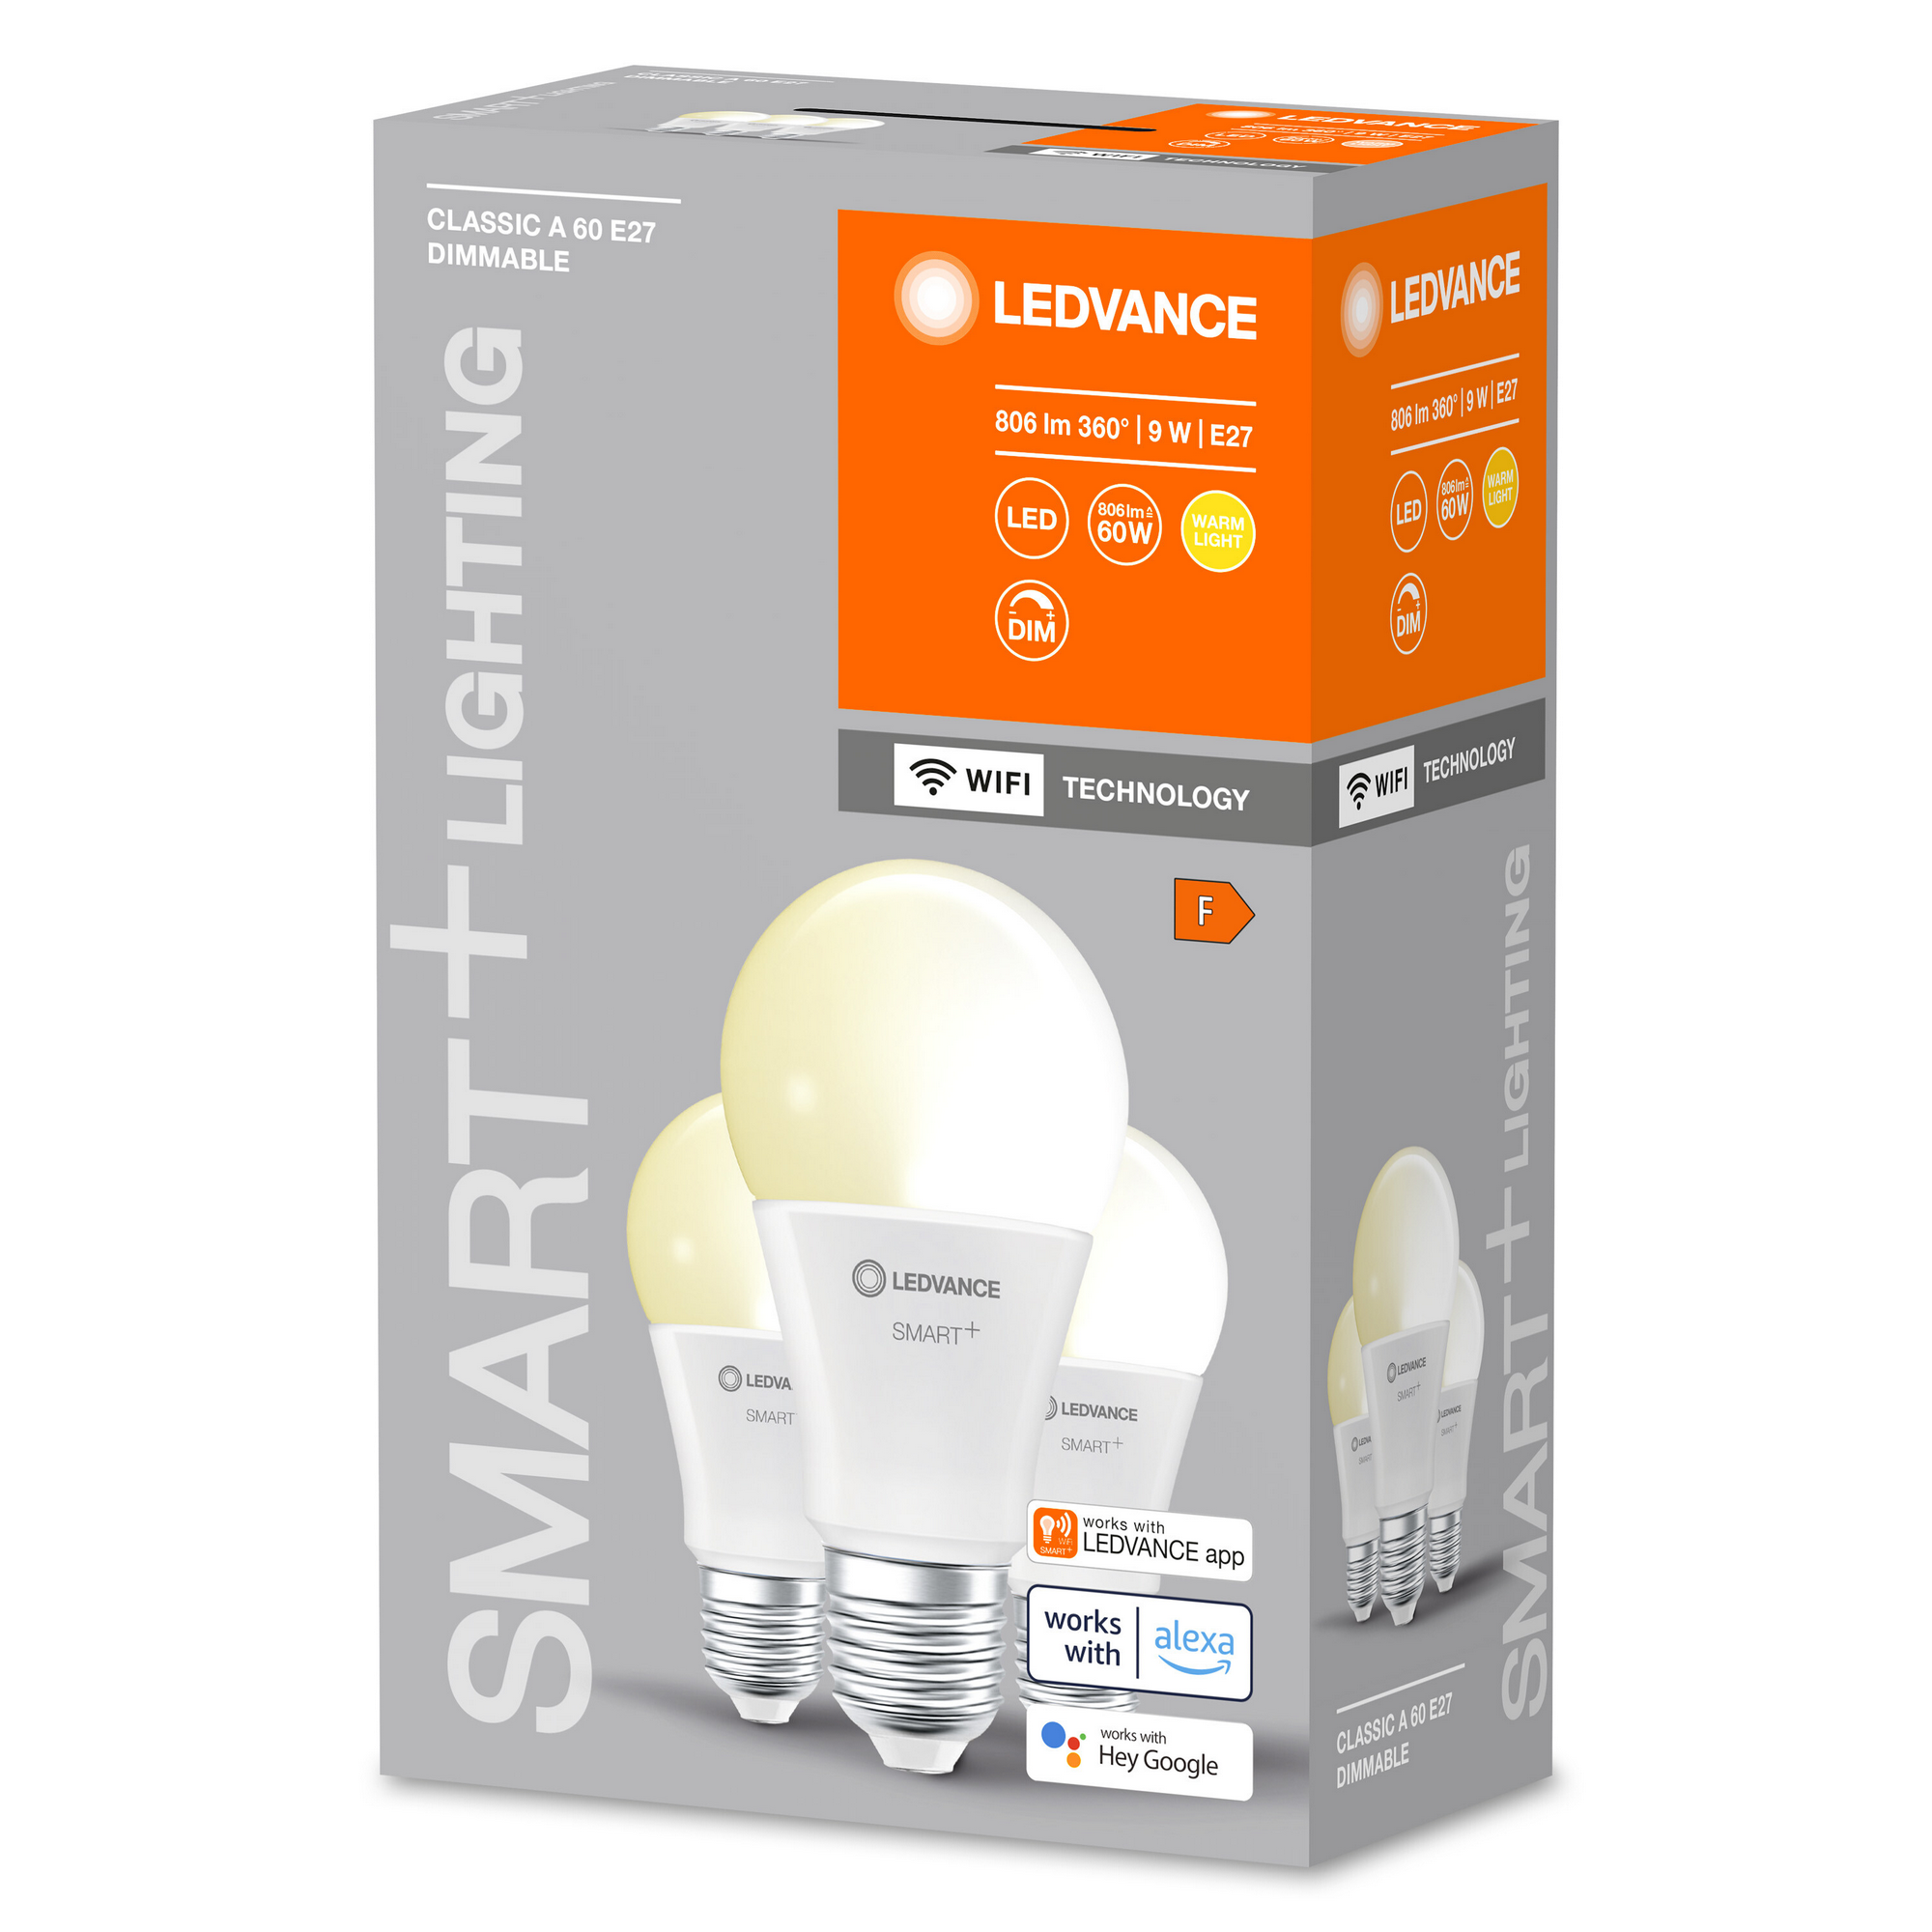 LED-Lampe 'Smart+ WiFi CLA' warmweiß 9 W E27 806 lm, dimmbar 3er-Pack + product picture